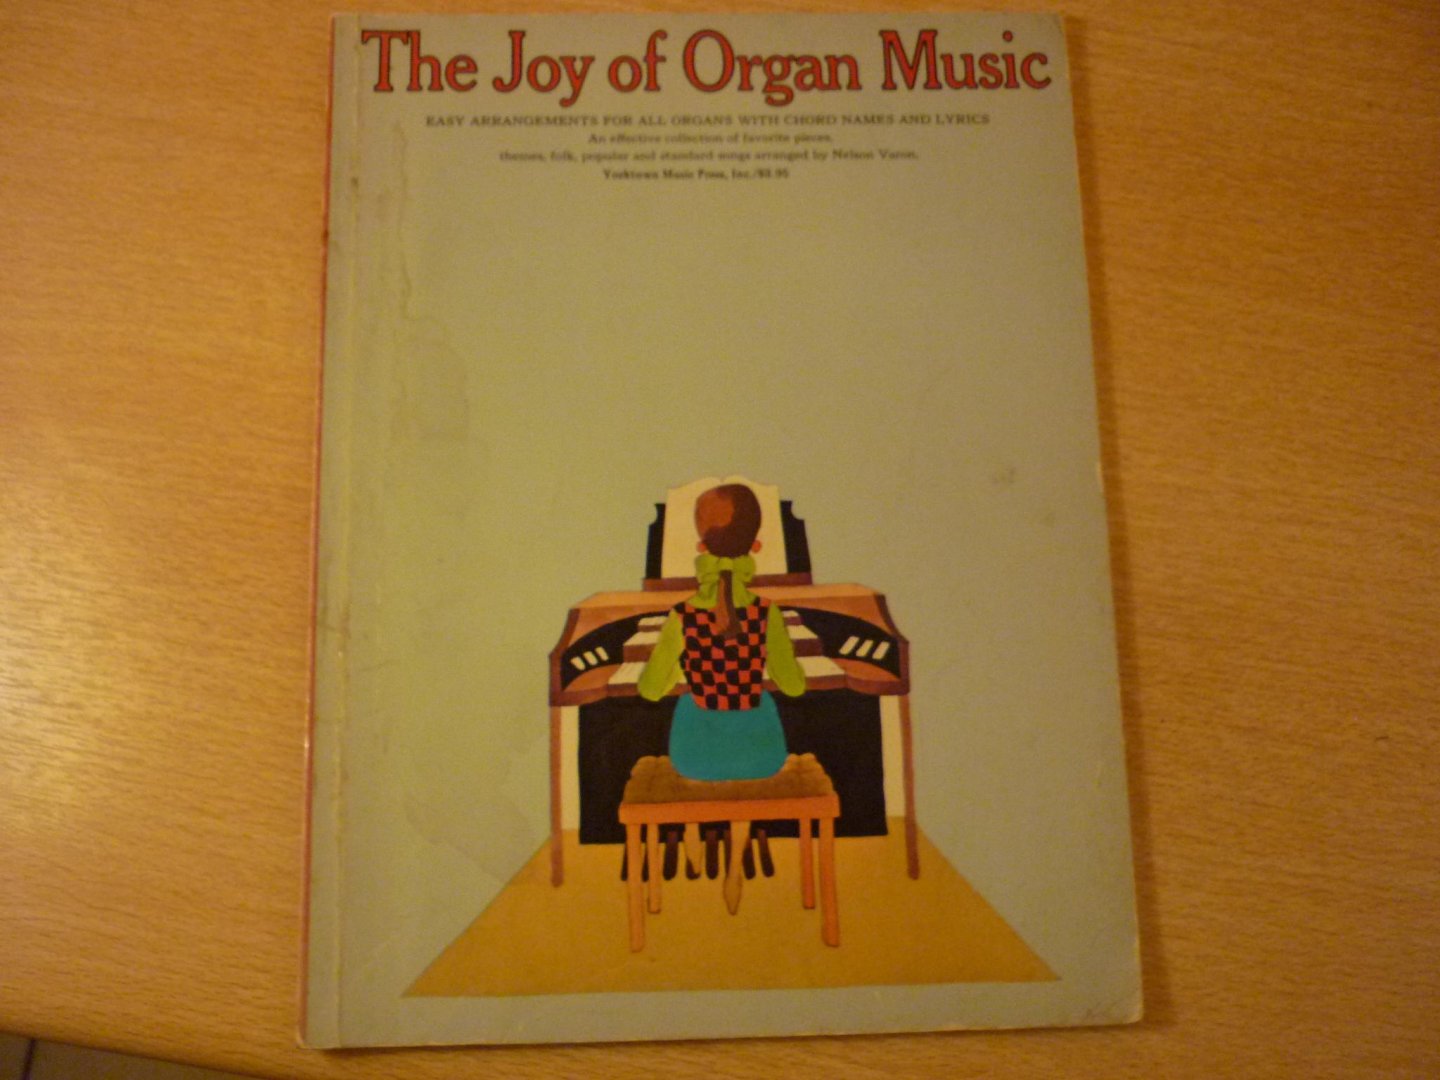 Varon; Nelson - The Joy of Organ Music; Easy arrangements for all Organs with Chord Names and Lyrics